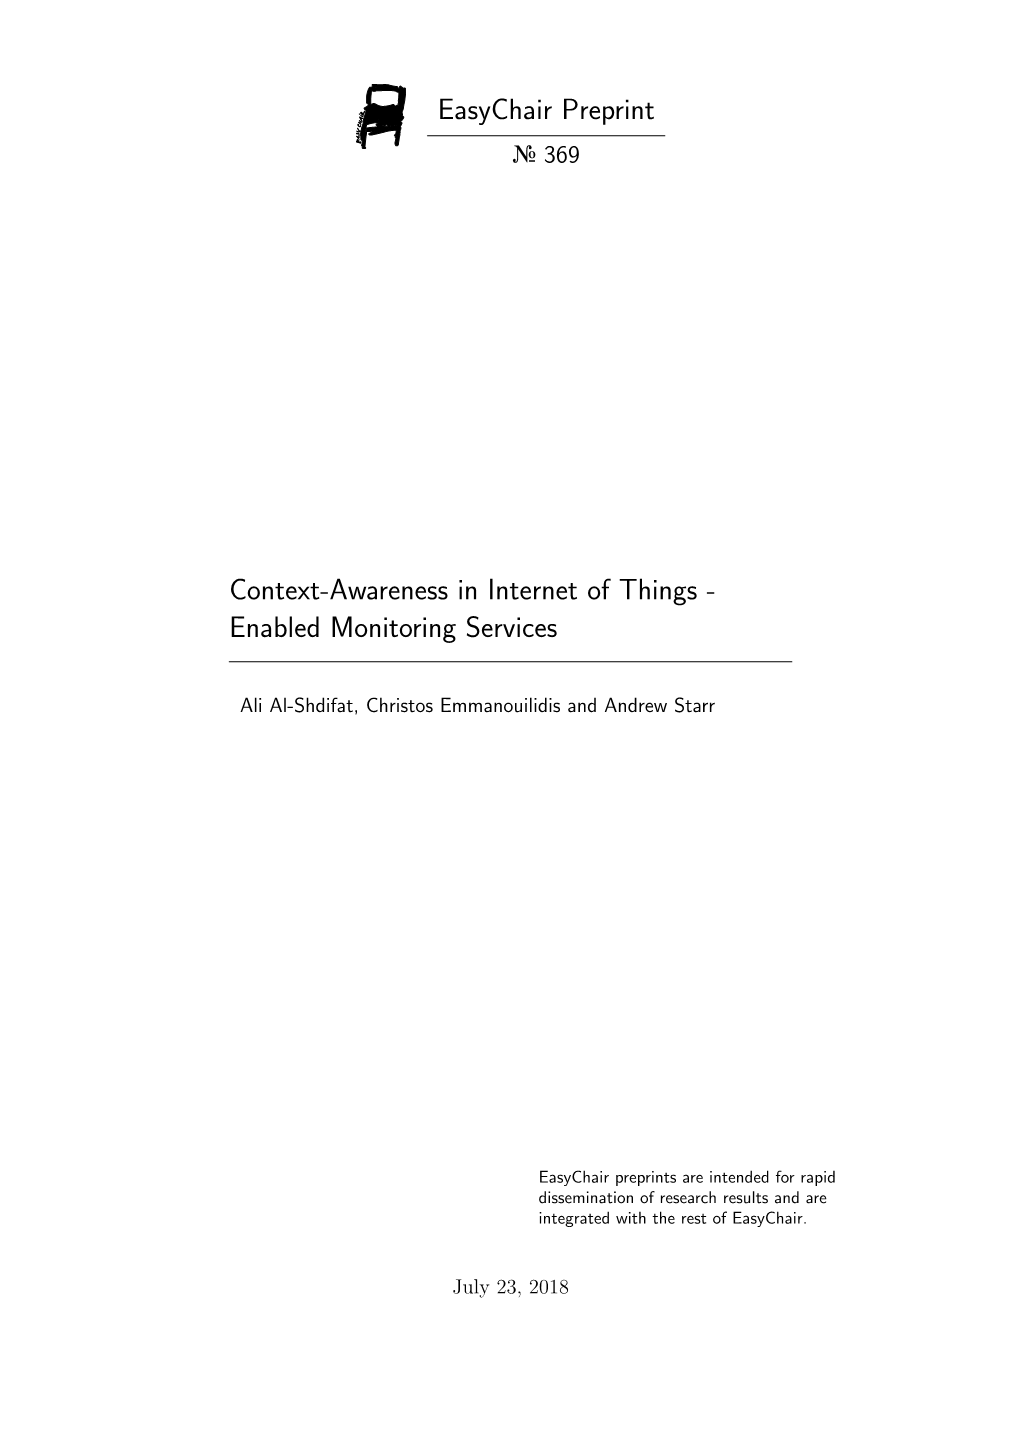 Context-Awareness in Internet of Things-Enabled Monitoring Services